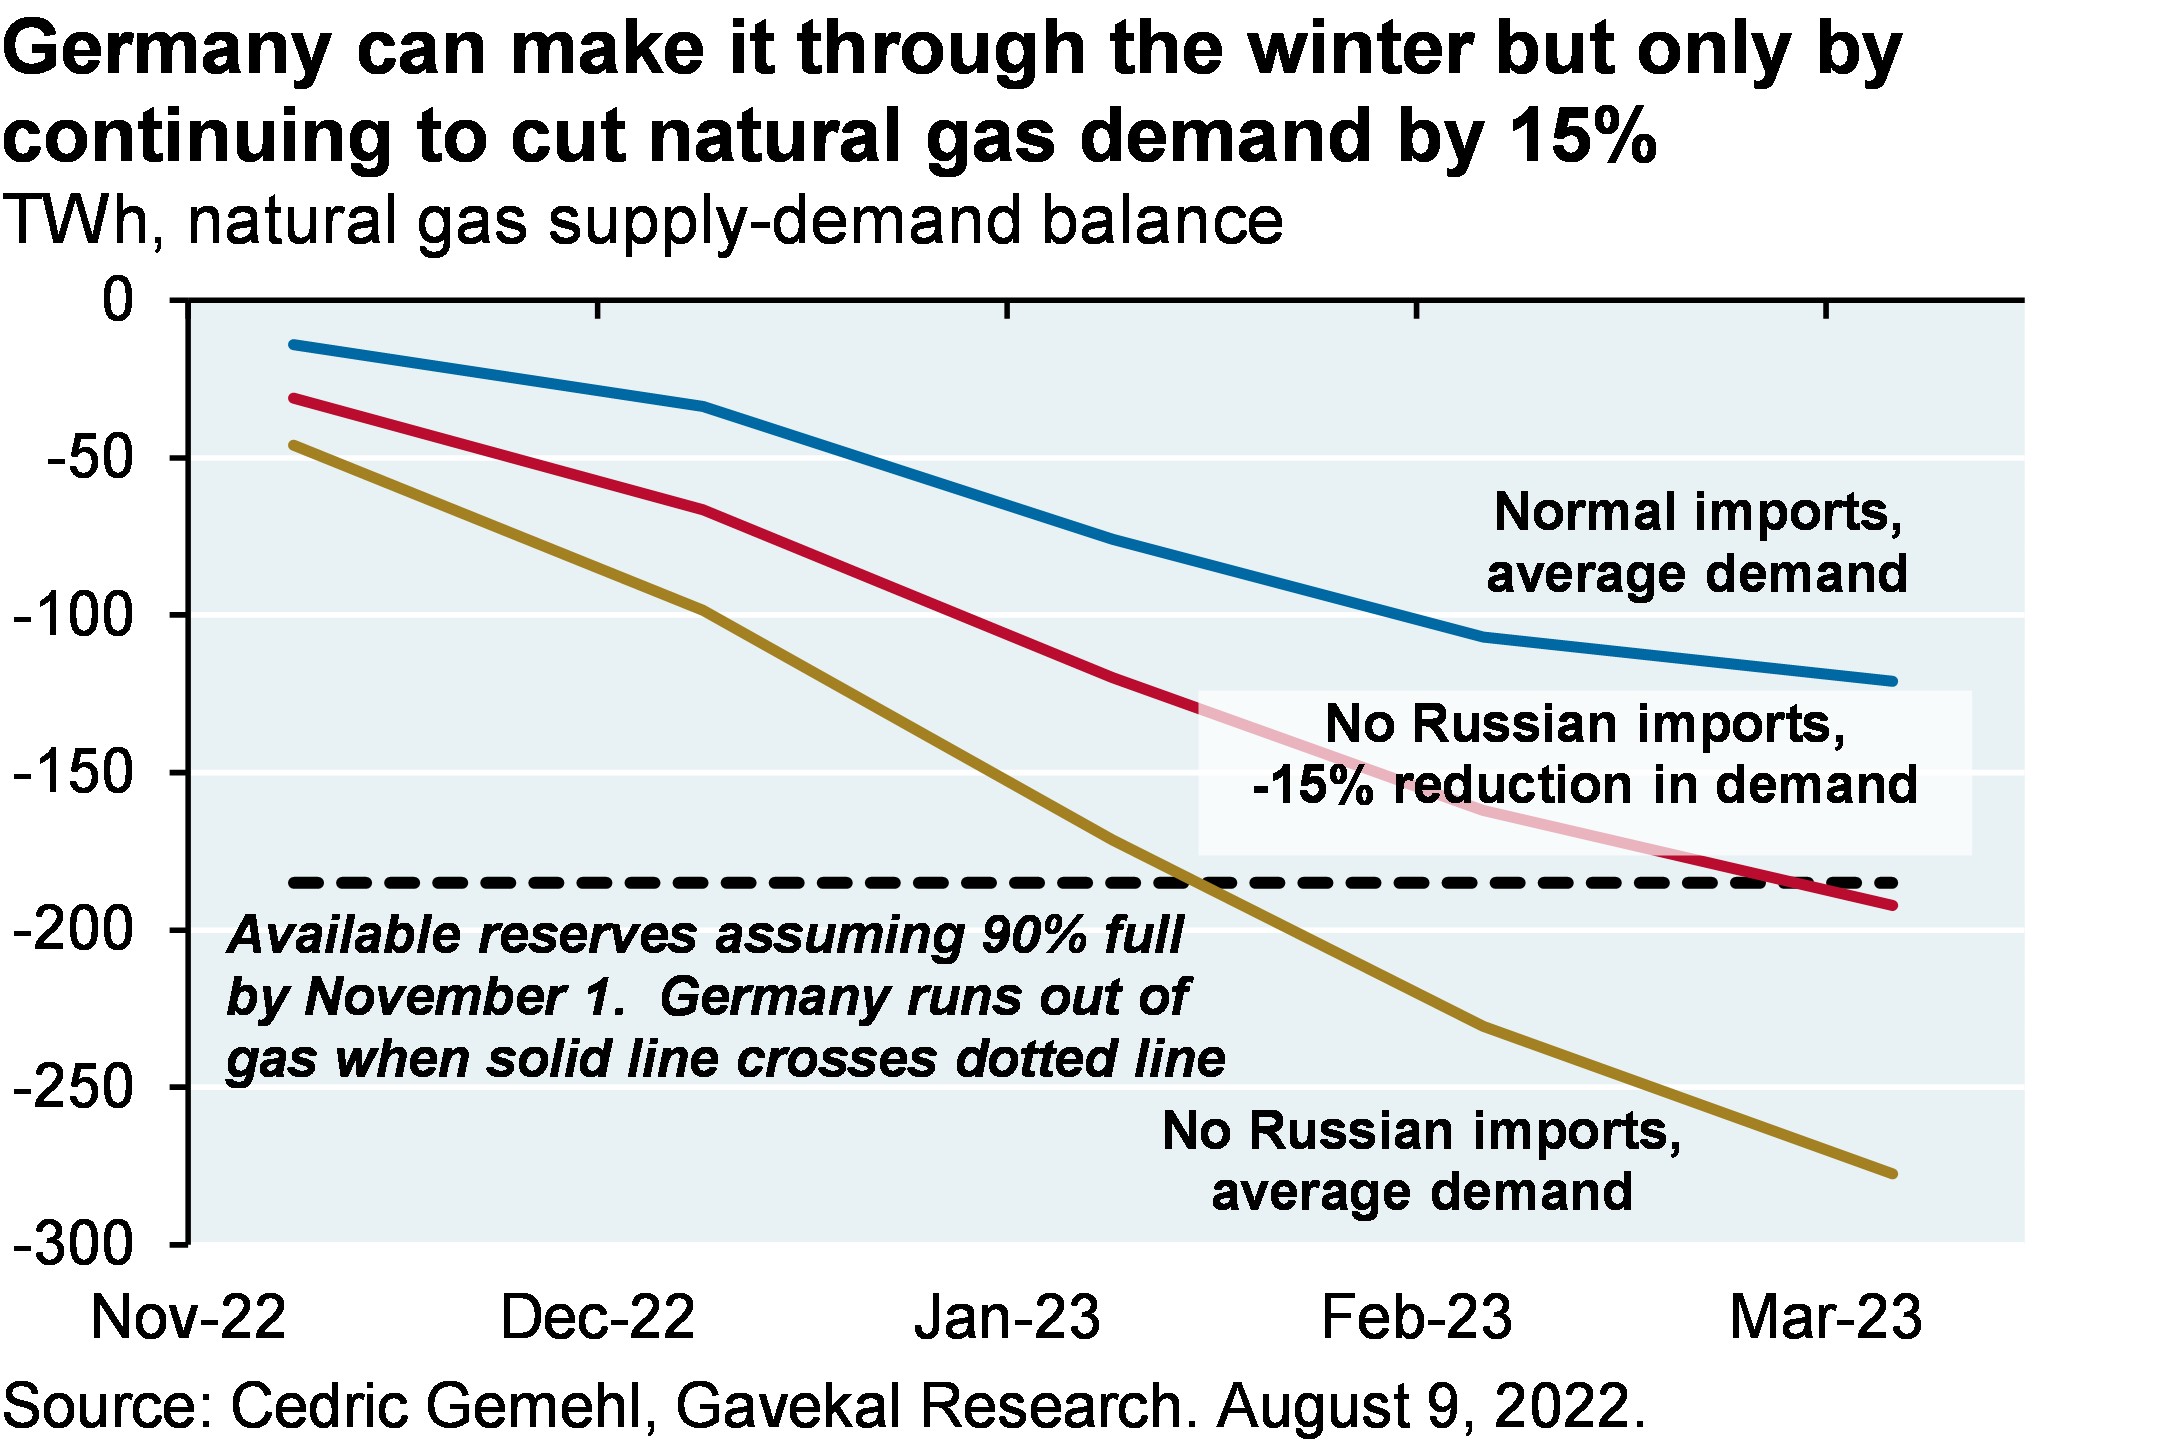 Germany can make it through the winter but only by conibuing to cut natural gas demand by 15%